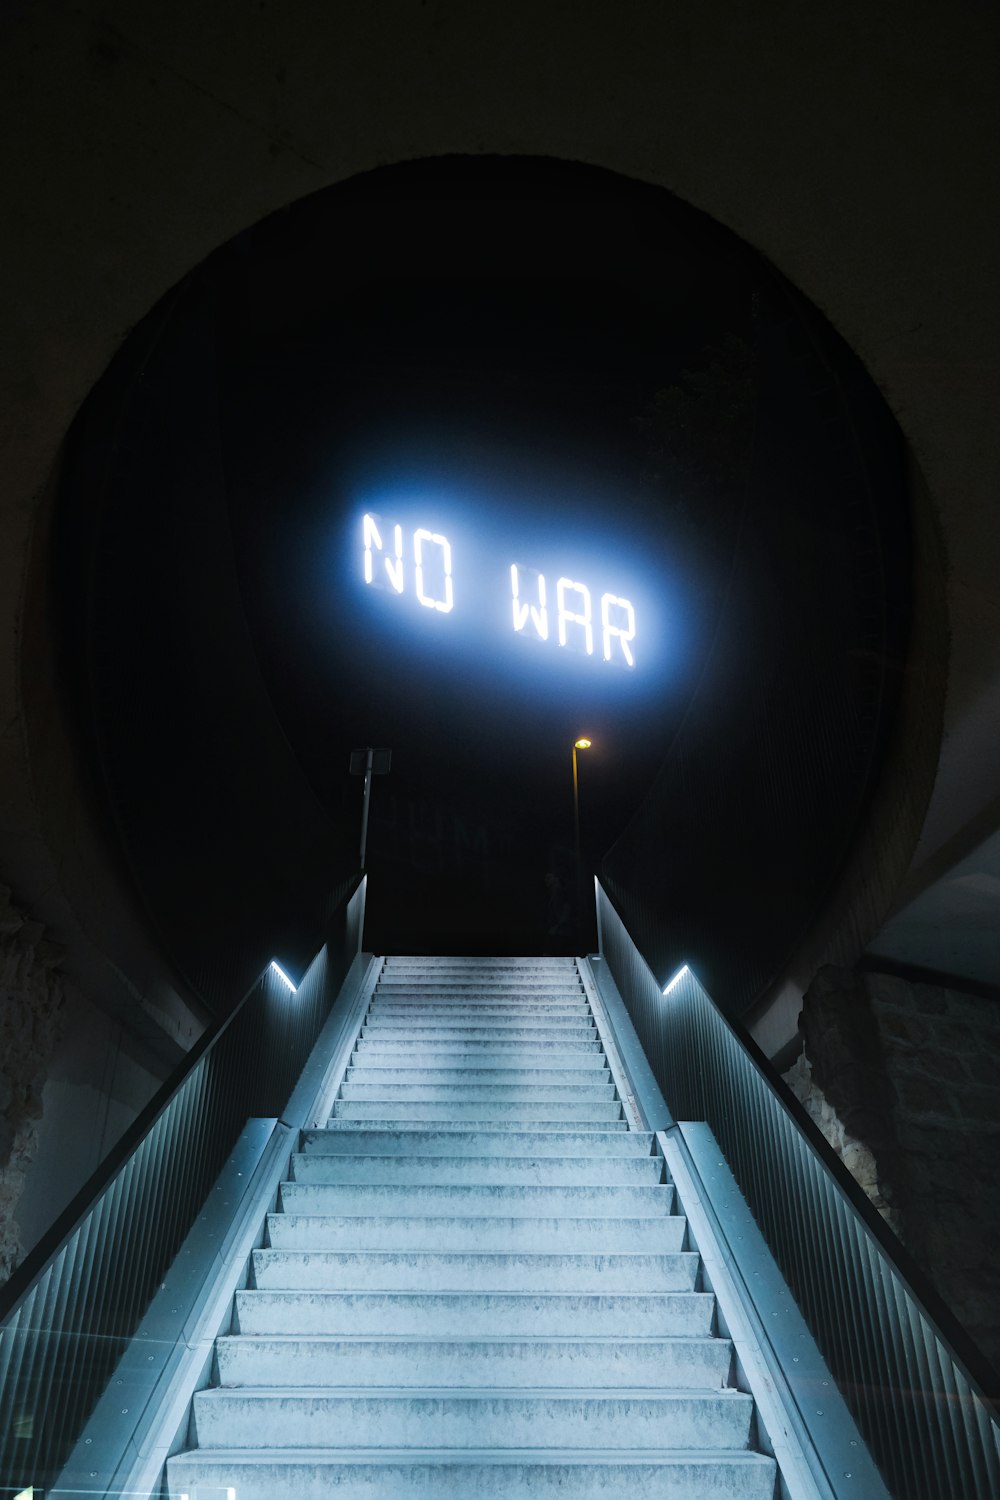 a set of stairs leading up to a sign that says no war